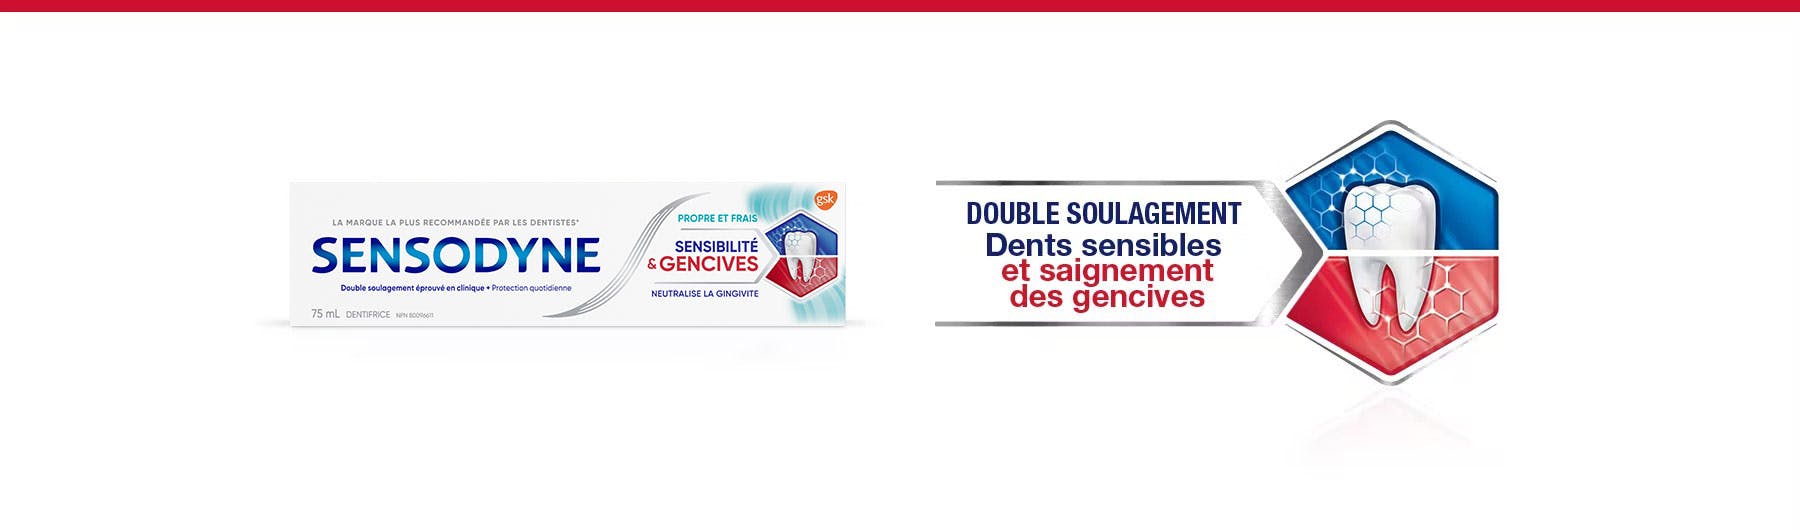 Dual relief from sensitive teeth clean and fresh banner